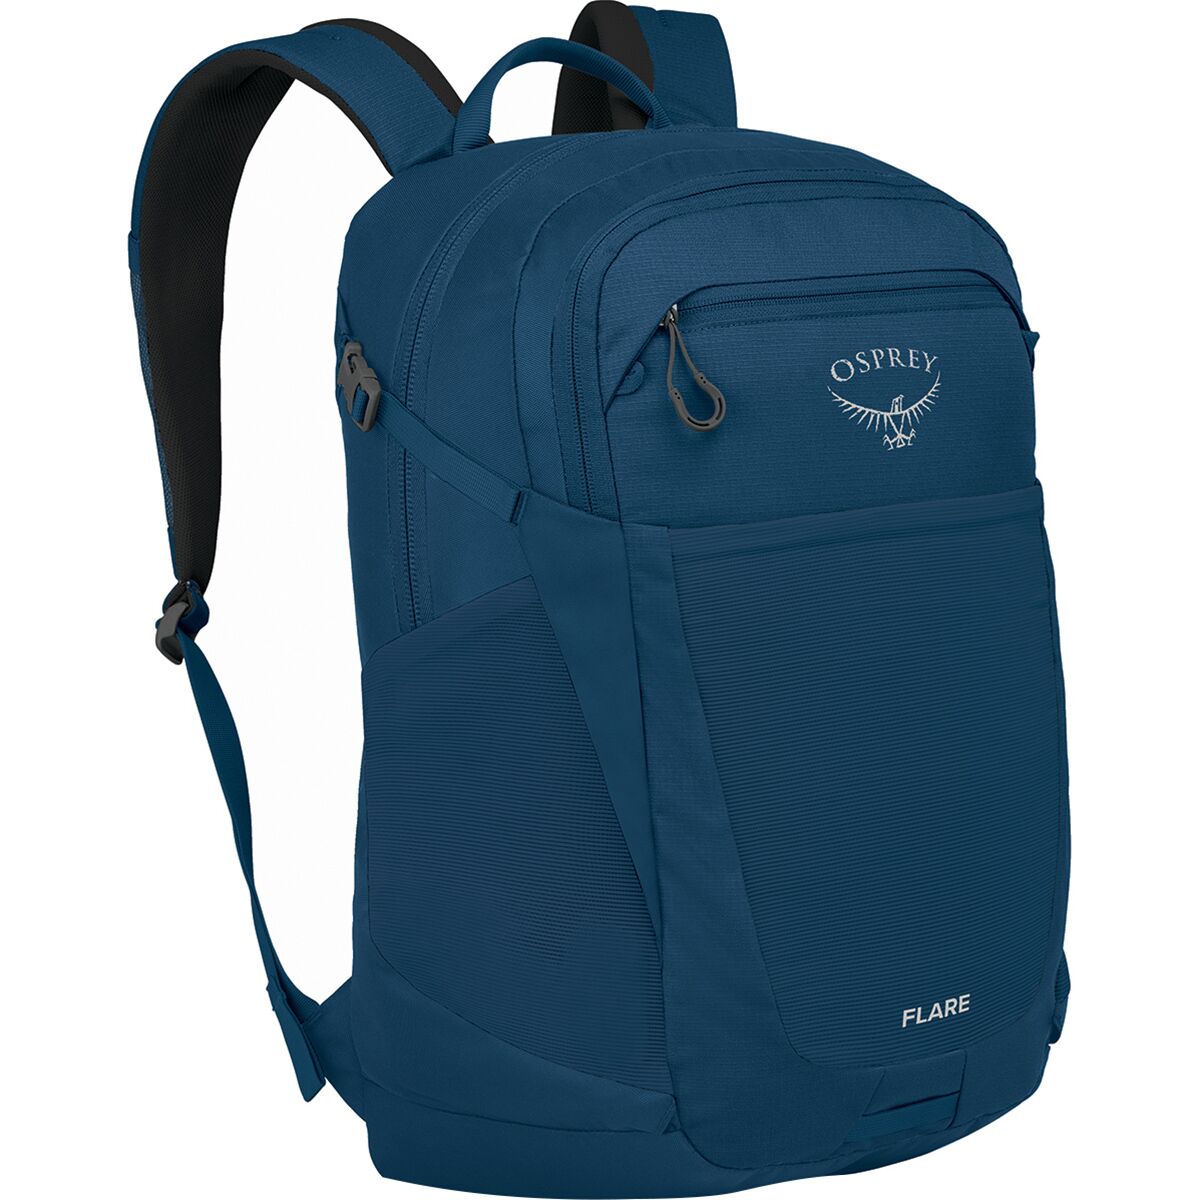 Osprey Packs Flare 28L Pack Night Shift Blue One Size